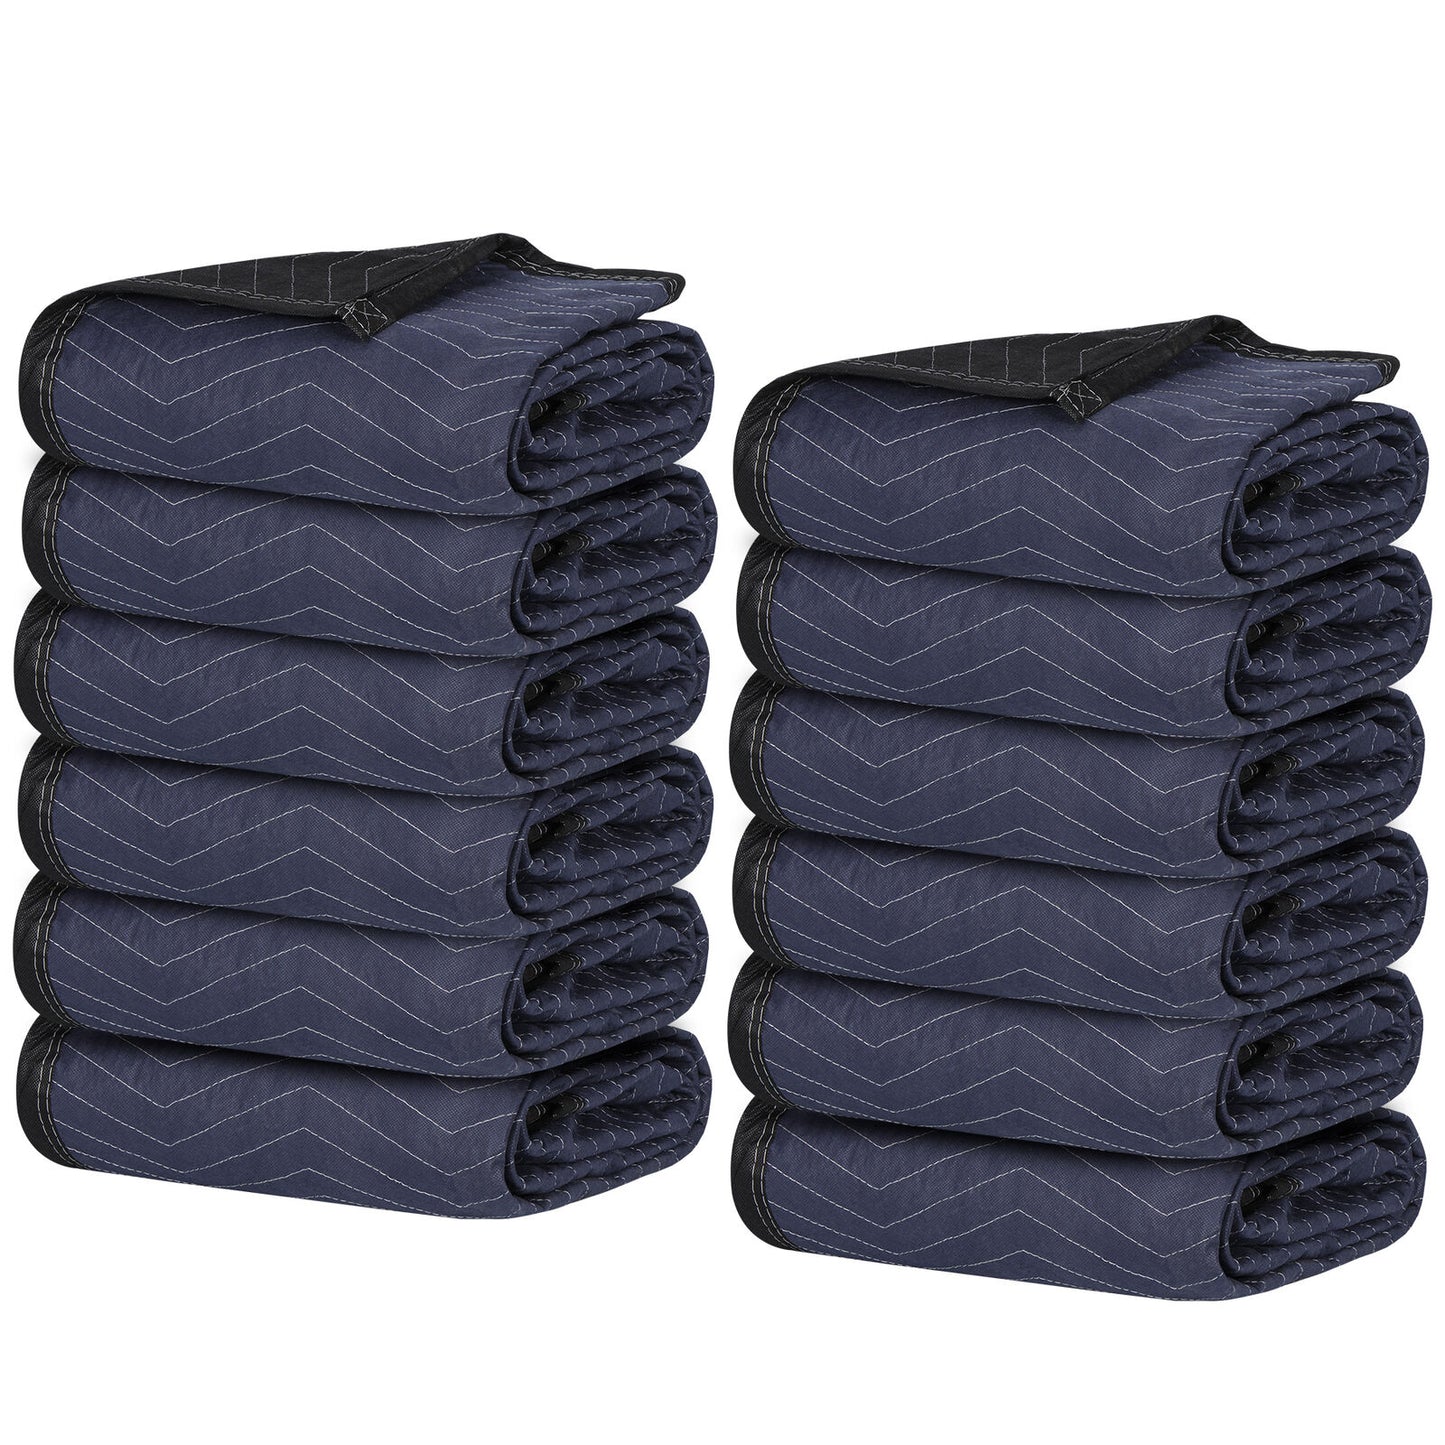 80"x72" Furniture 24 Moving Blankets Protective Shipping Packing Pads Blue/Black